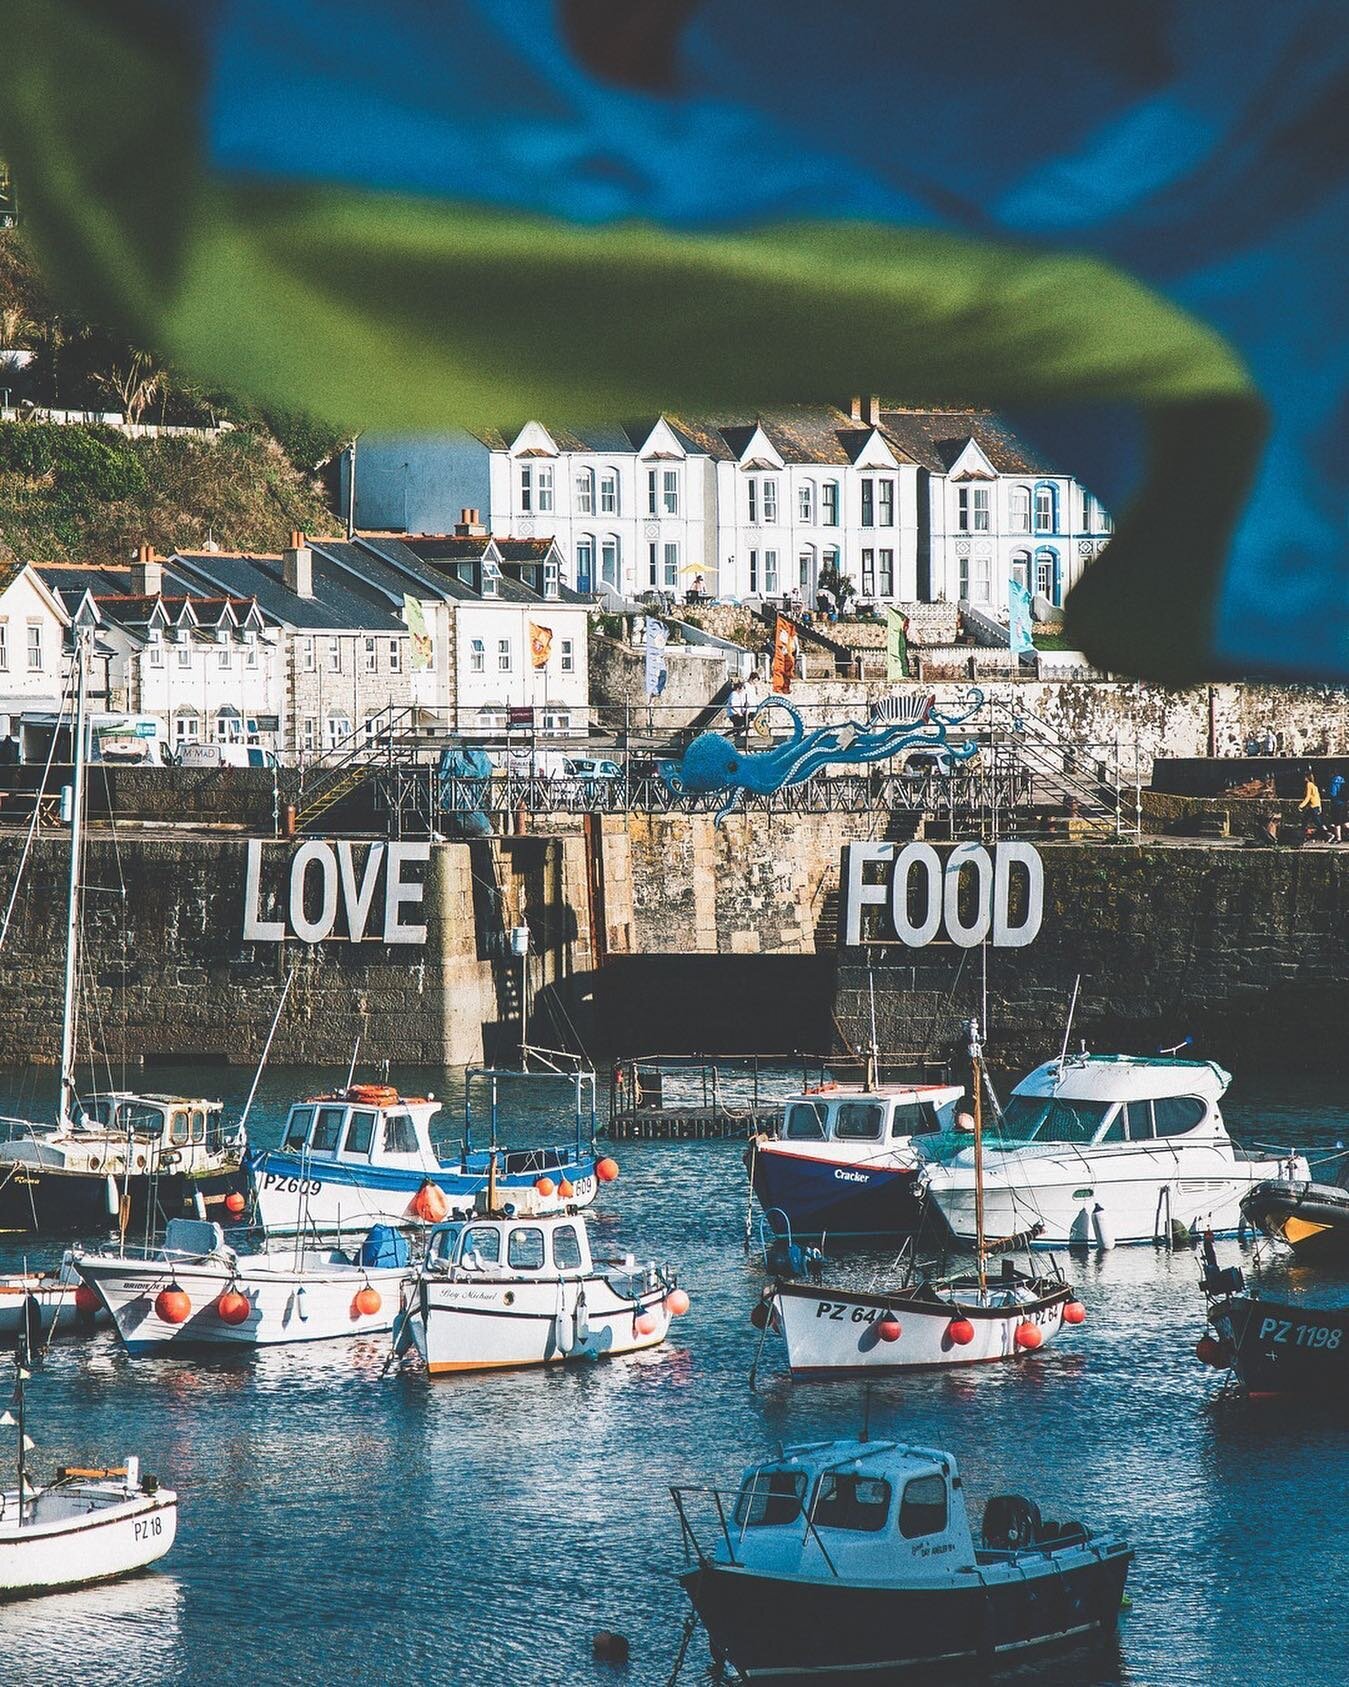 ⚡&nbsp;GIVEAWAY ALERT!&nbsp;⚡

We're absolutely buzzing to be the exclusive rum sponsor @porthlevenfest 2023! So buzzing in fact, that we're doing a massive giveaway to celebrate! Here's what you can win:

* 2 x Weekend Gourmet tickets to the festiva